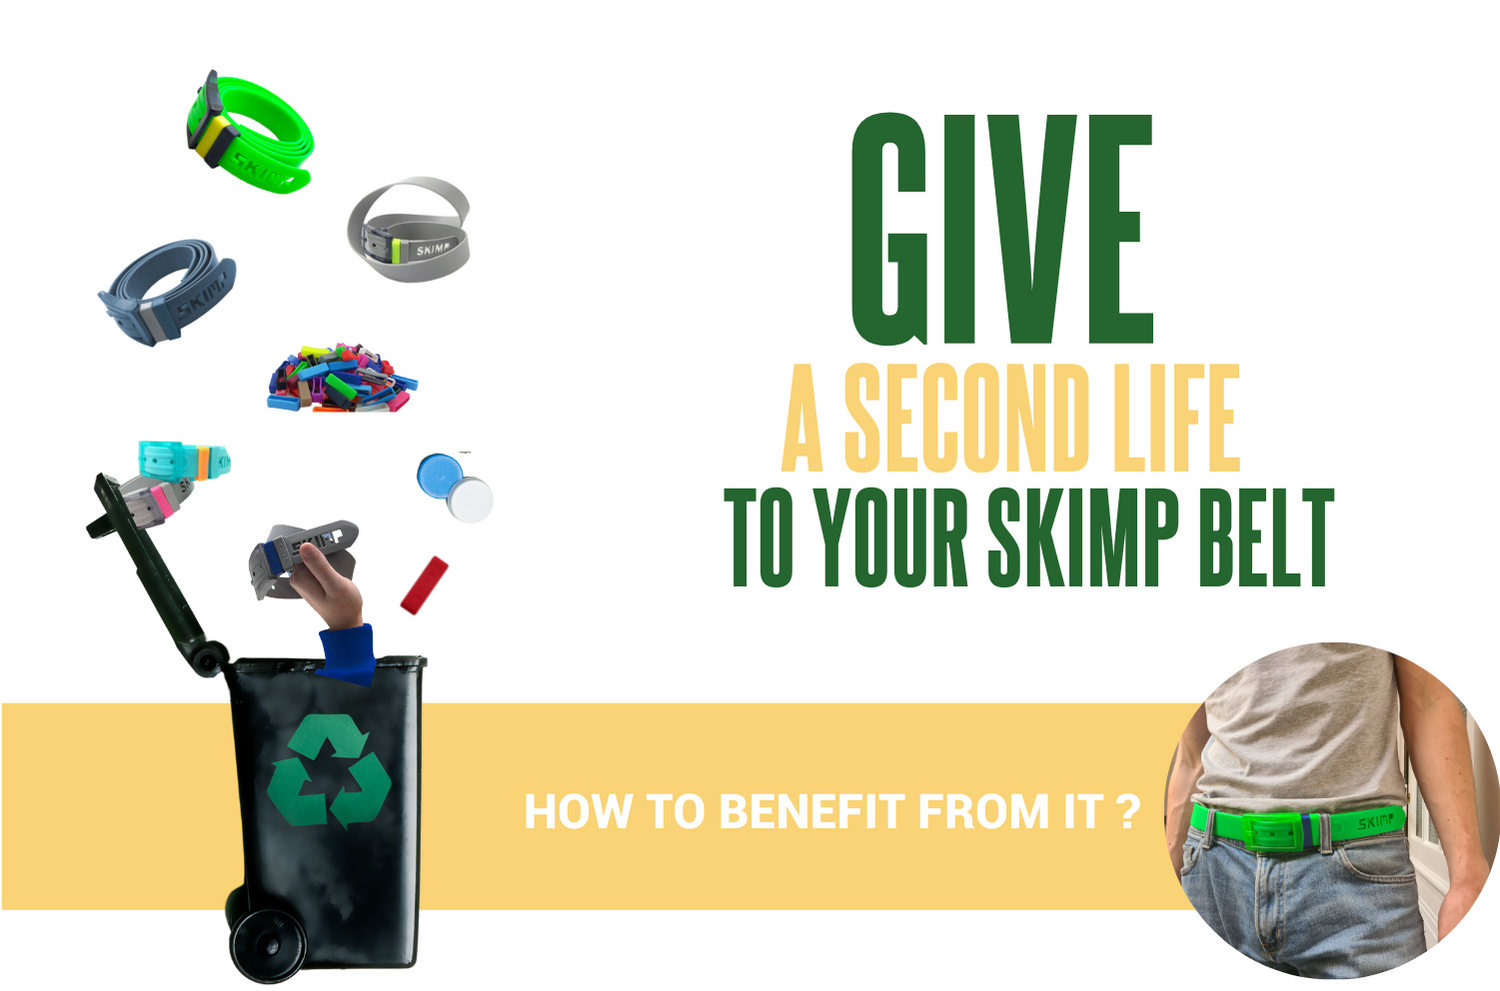 Give a second life to your SKIMP belt